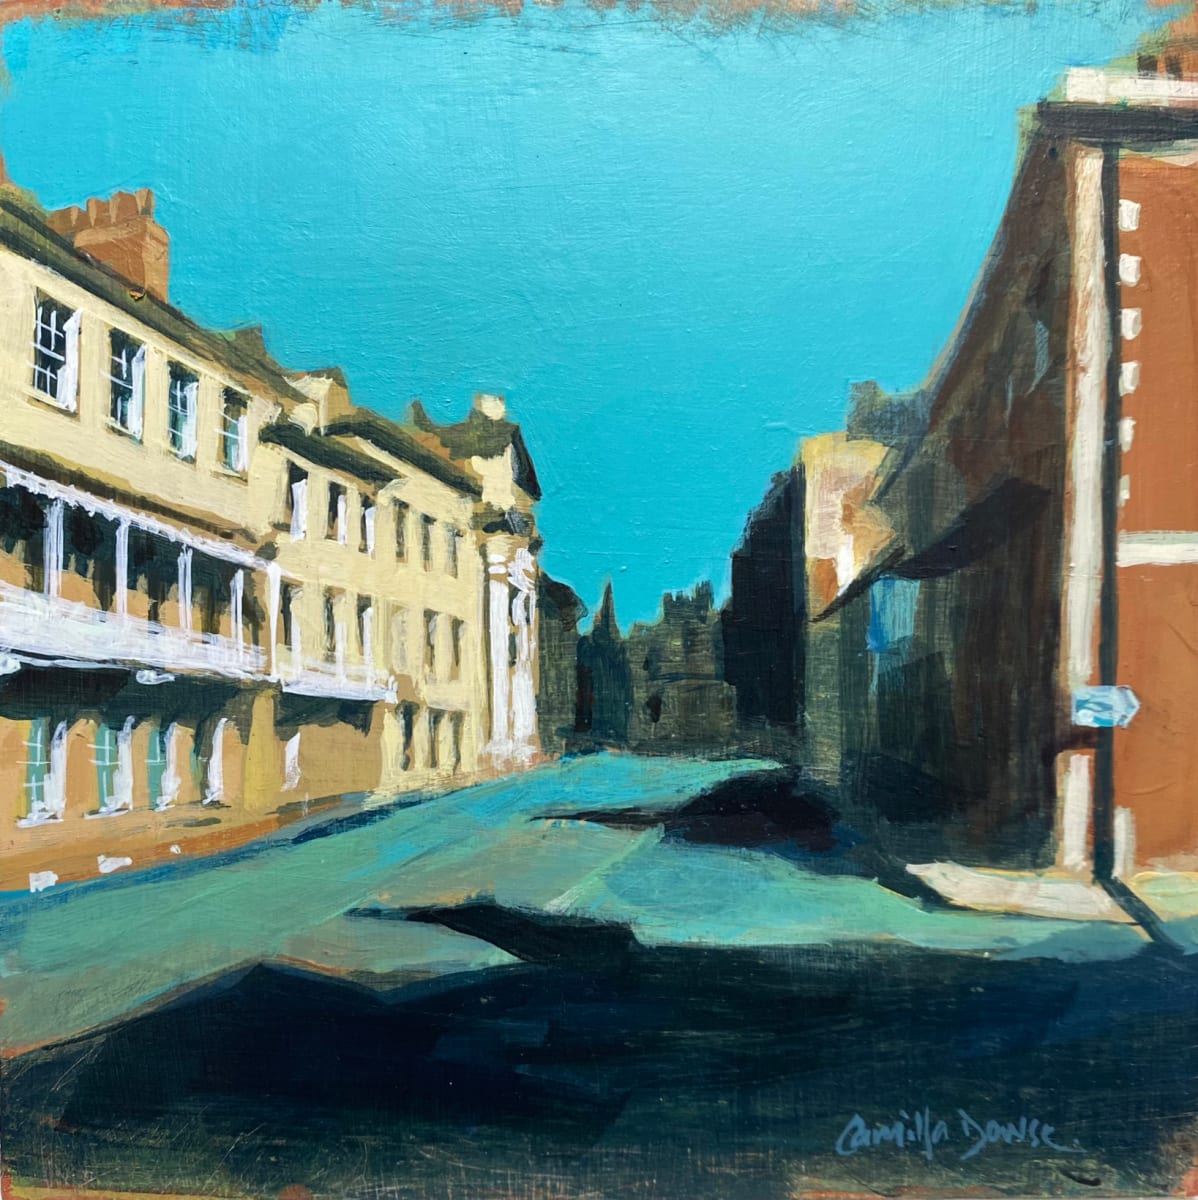 Beaumont Street towards St Giles, Oxford (study) by Camilla Dowse 